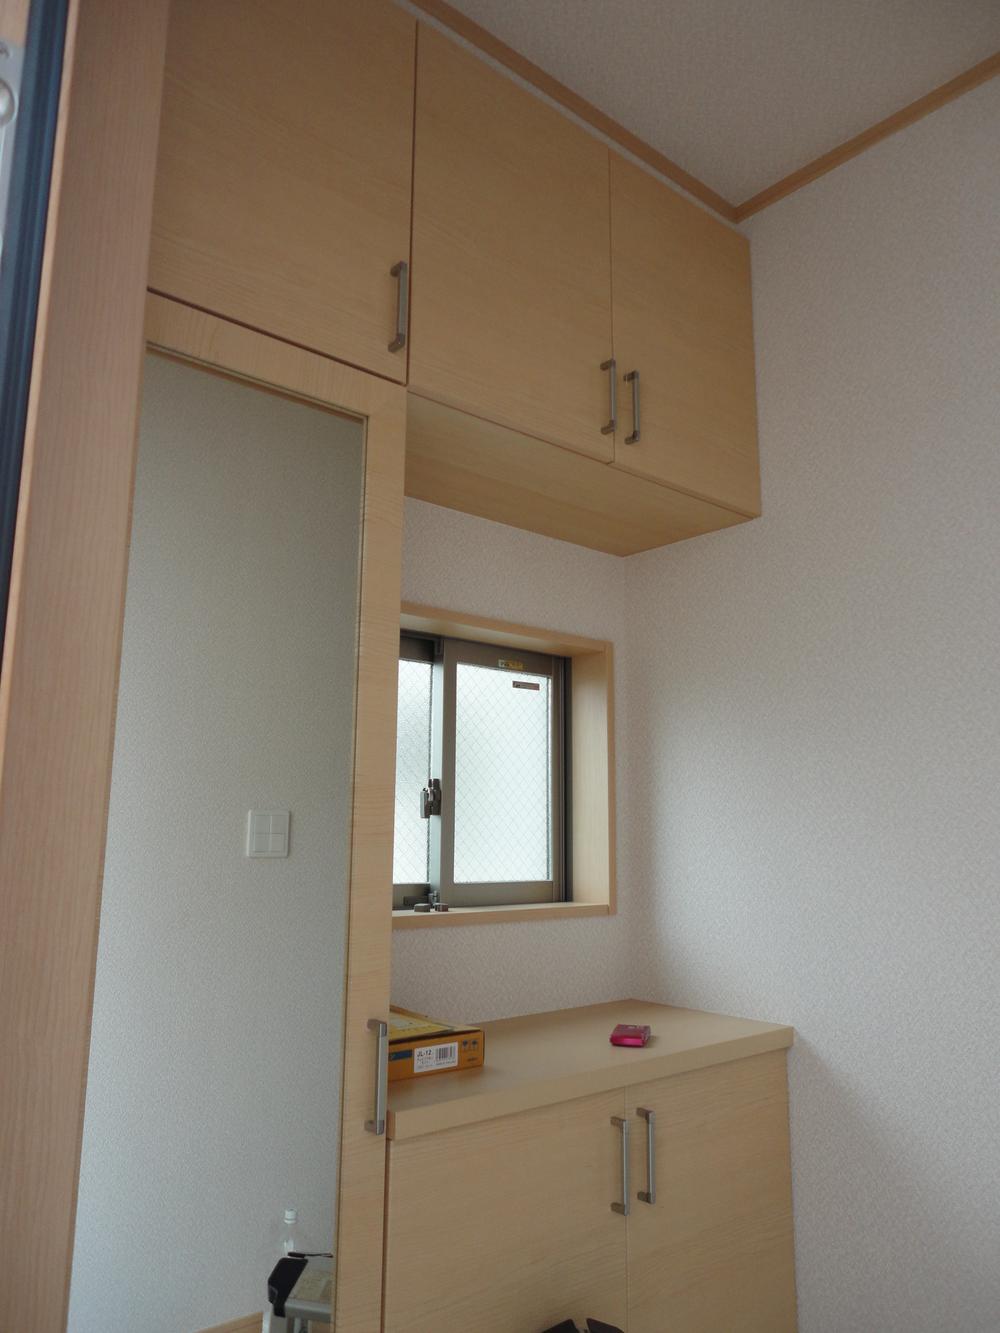 Entrance. Entrance, Storage lot, . Full-length mirror is also there to, very convenient. 